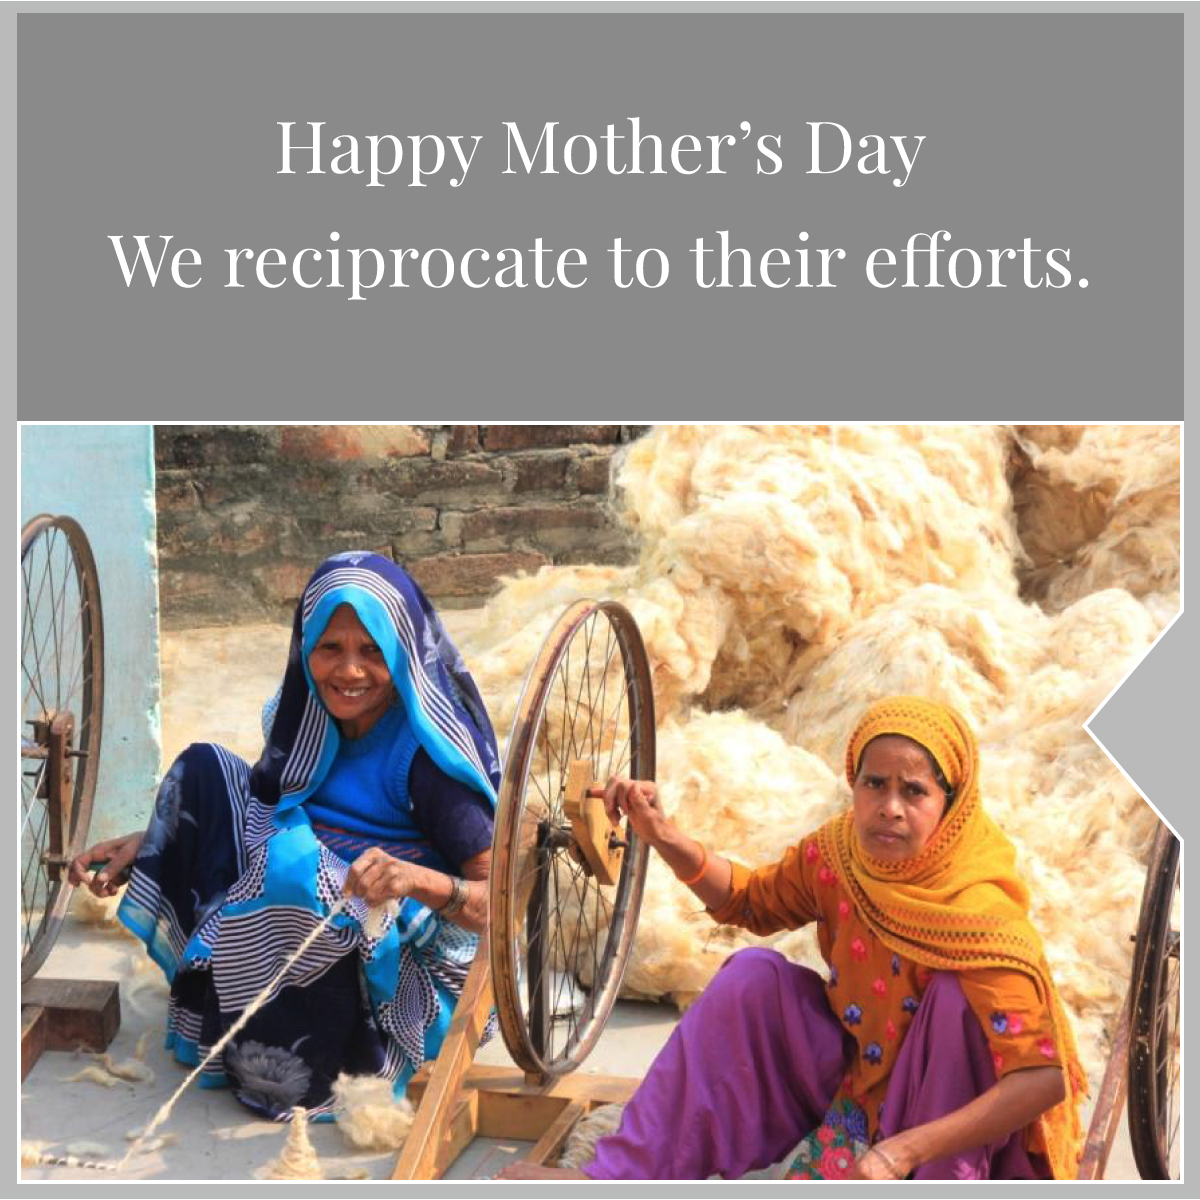 Mothers are unique, and so is Mother's Day.
We wish you a Happy Mother's Day to all the mothers in the universe.

#mothersday #spring #gift #momlife #stayhome #mom #supportsmallbusiness #staysafe #supportlocal #mothersday #motherhood #mothersday  #ArtisanLove #MomsWhoCreate